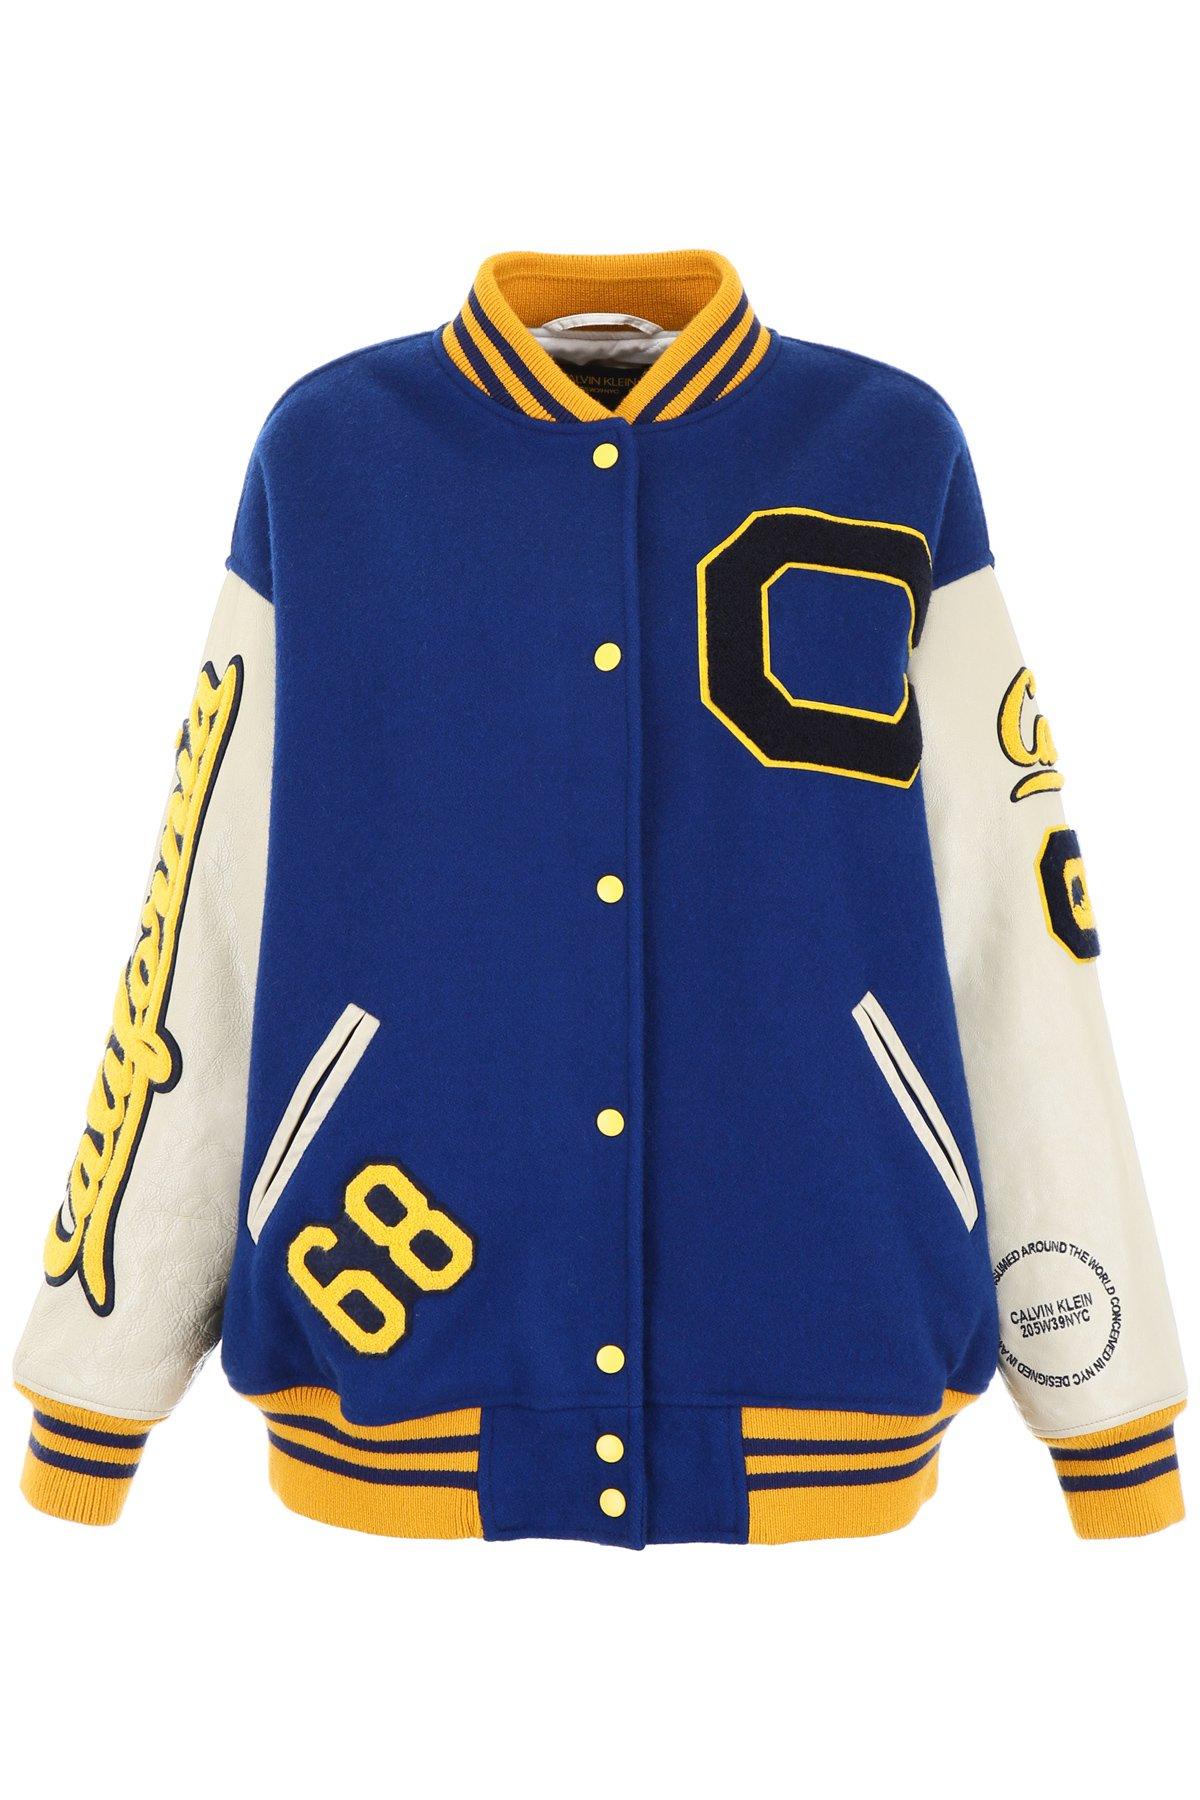 CALVIN KLEIN 205W39NYC Contrast Patches Varsity Bomber Jacket in Blue | Lyst